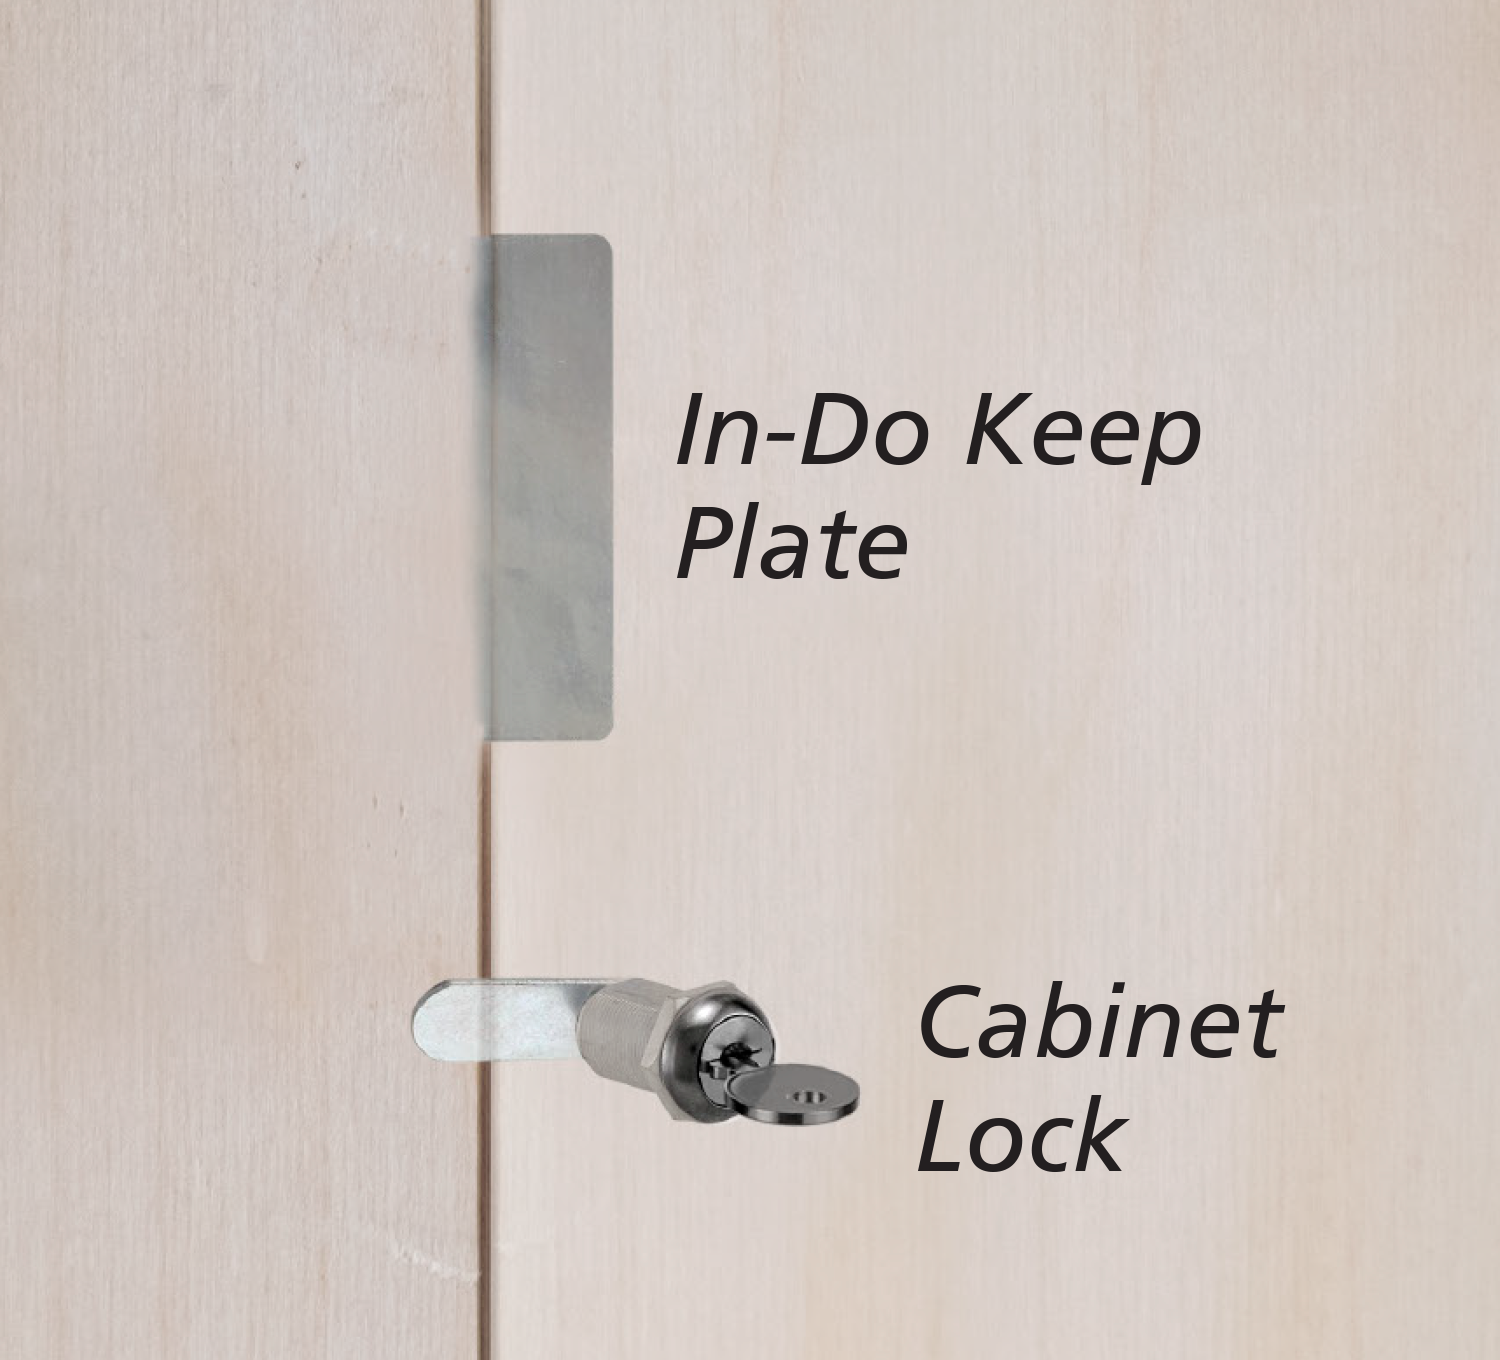 In-Do Keep Plate - FastCap